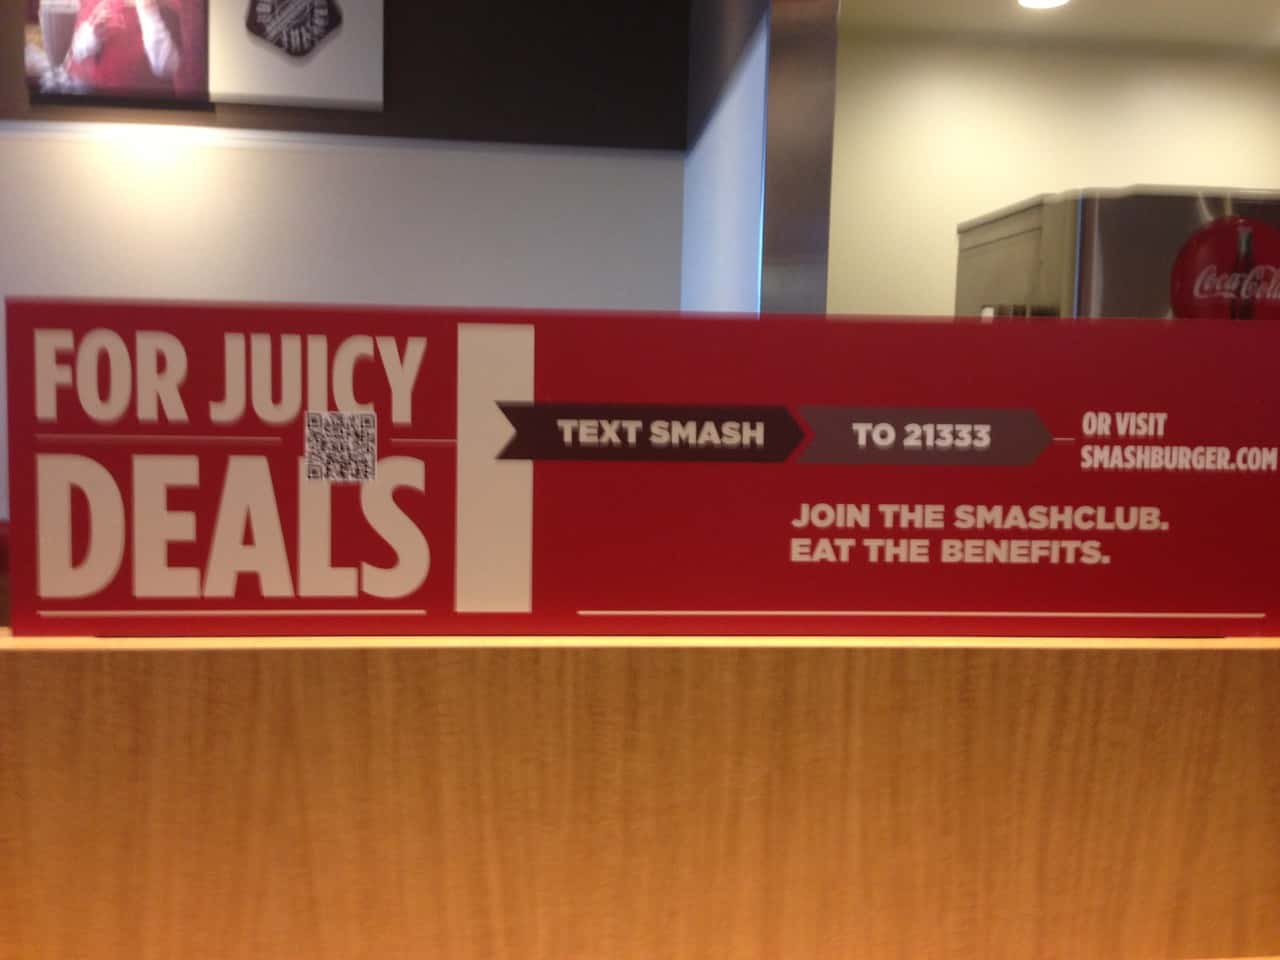 Restaurant SMS Advertising Example - Sign